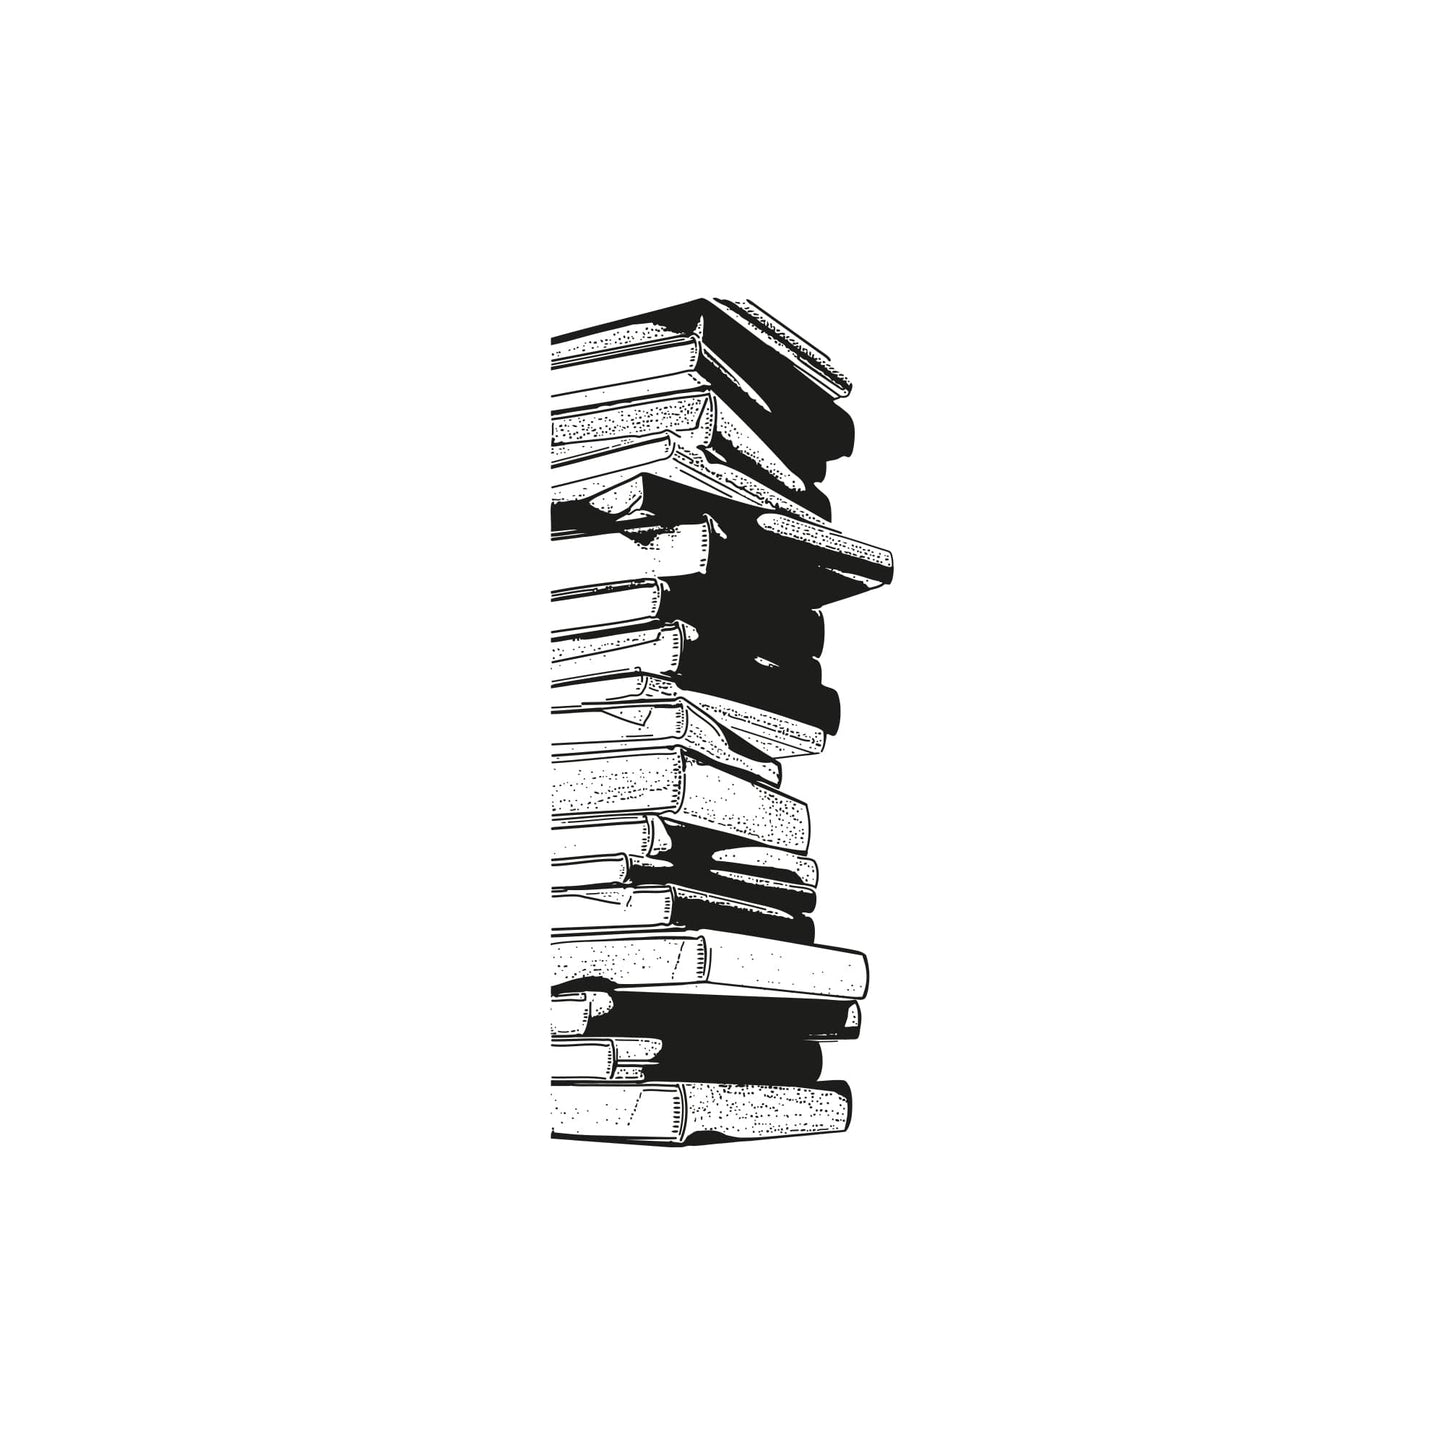 Stack of Library Books Wall Decal. Readers' Retreat Room. #5062